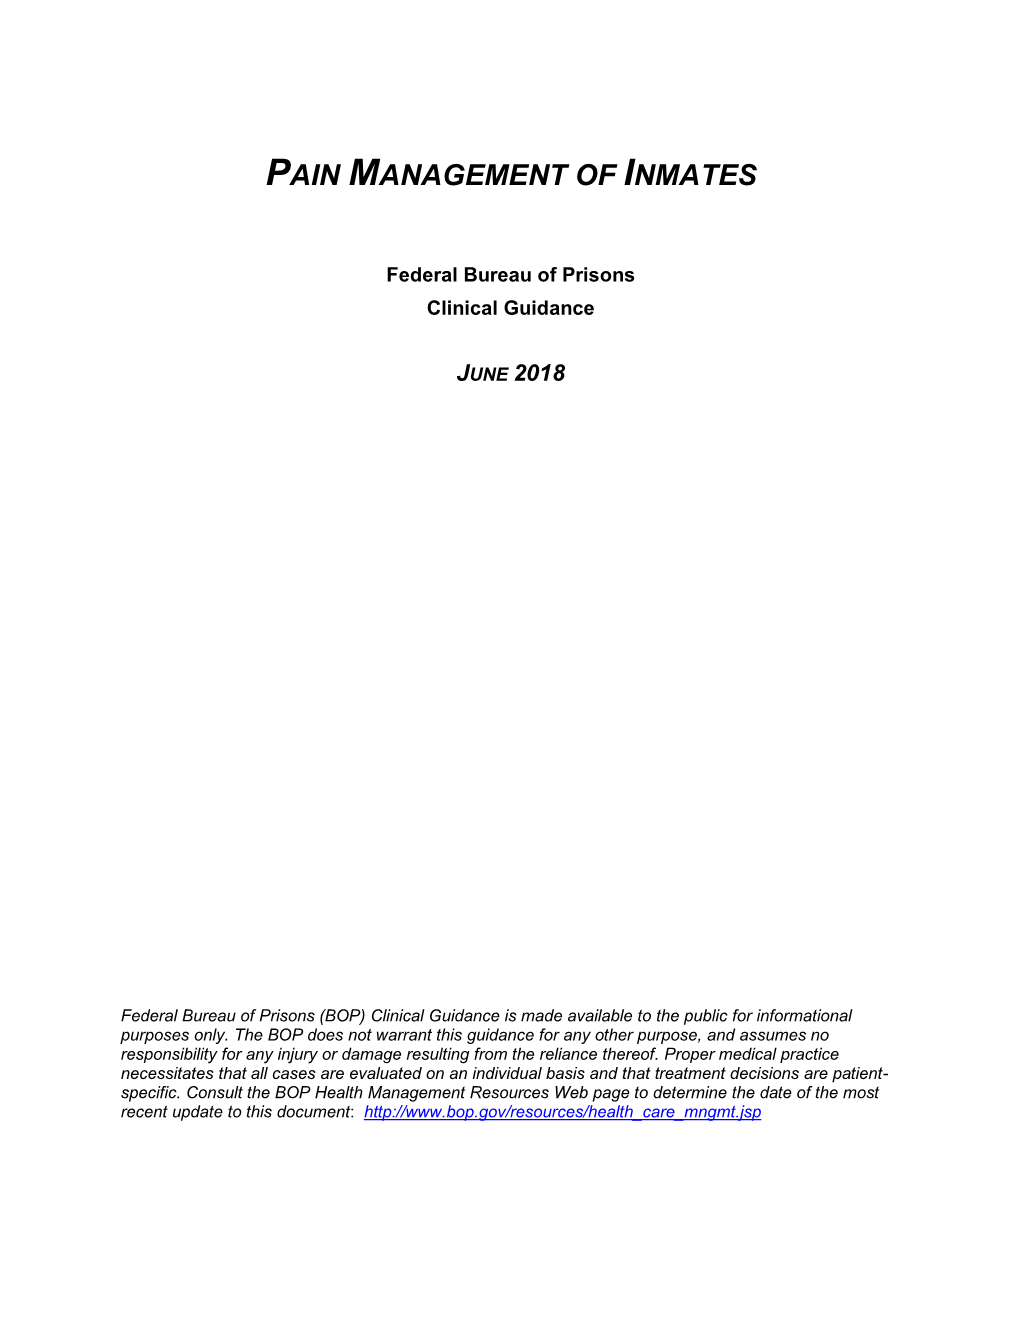 Pain Management of Inmates